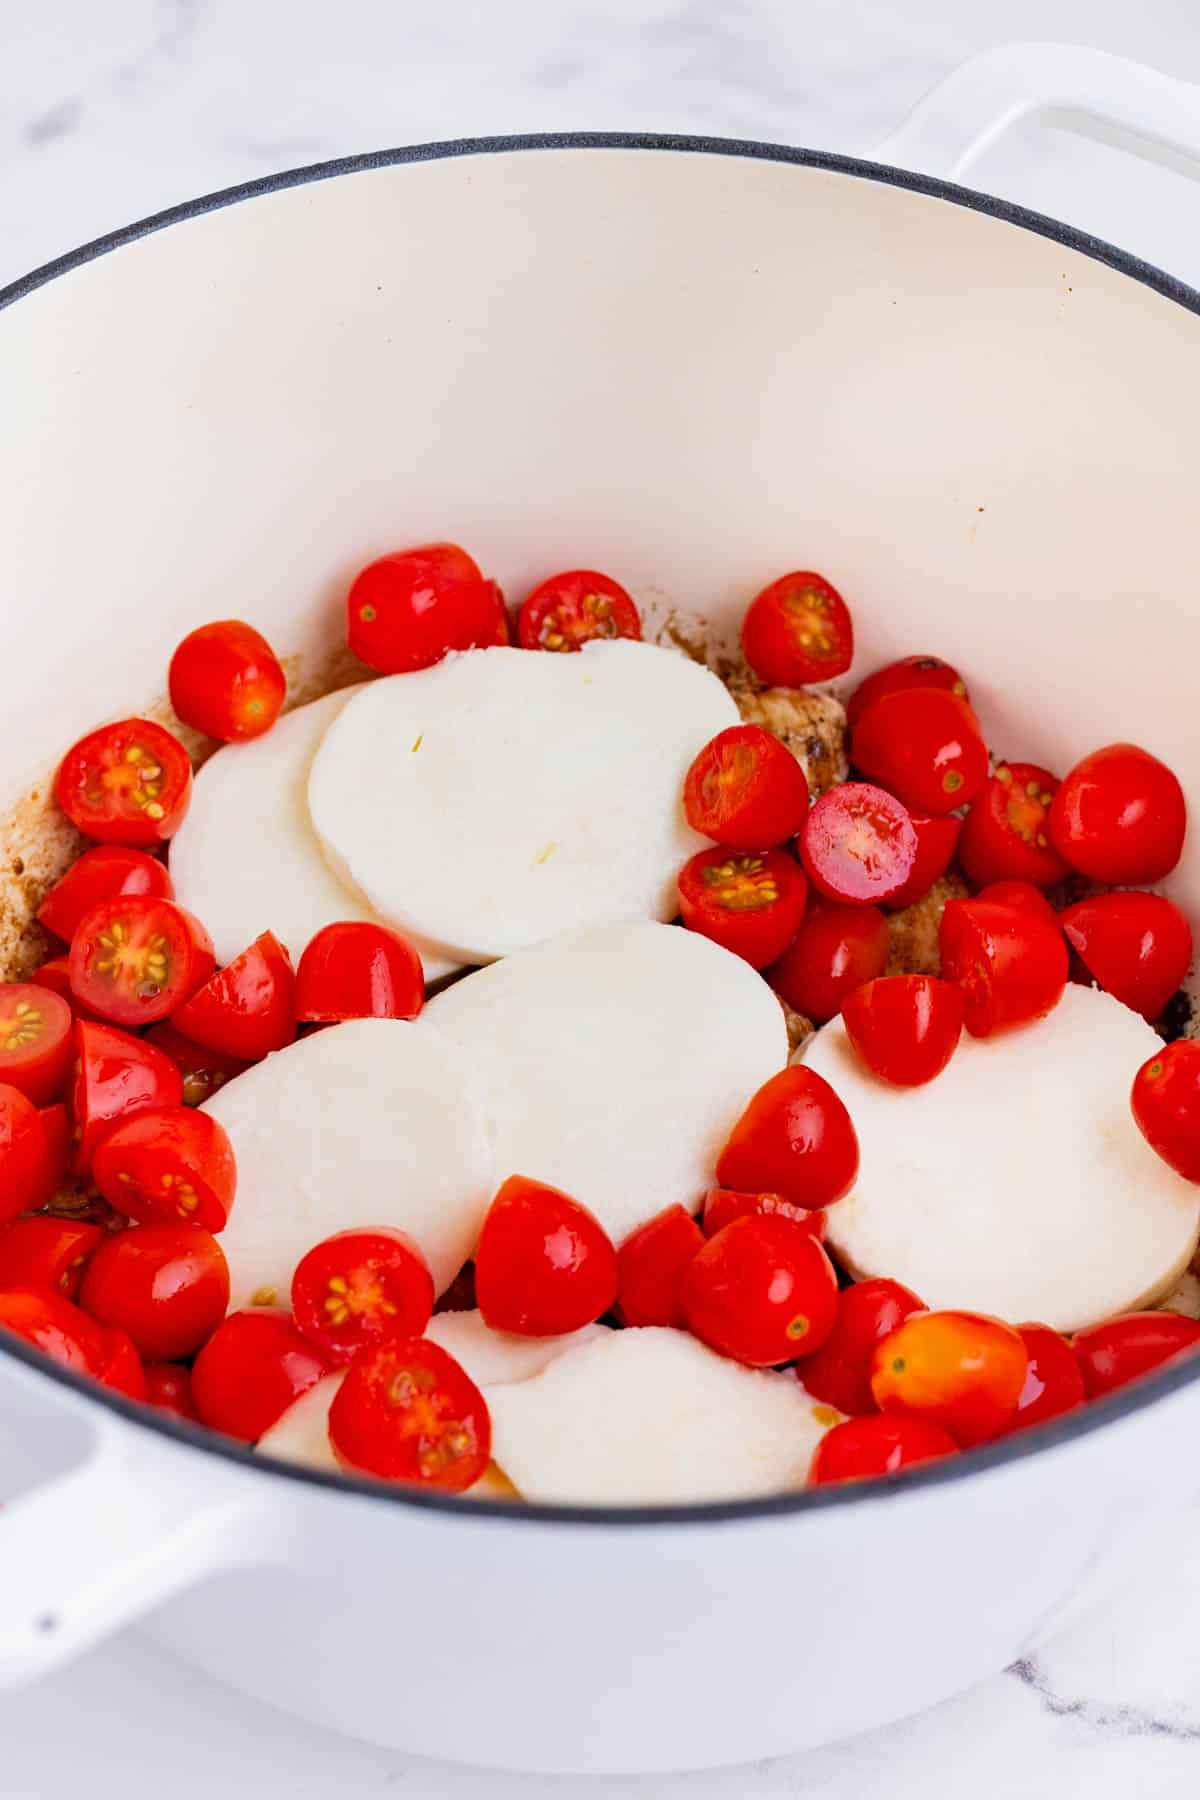 Mozzarella cheese and tomatoes are piled on top of the chicken.